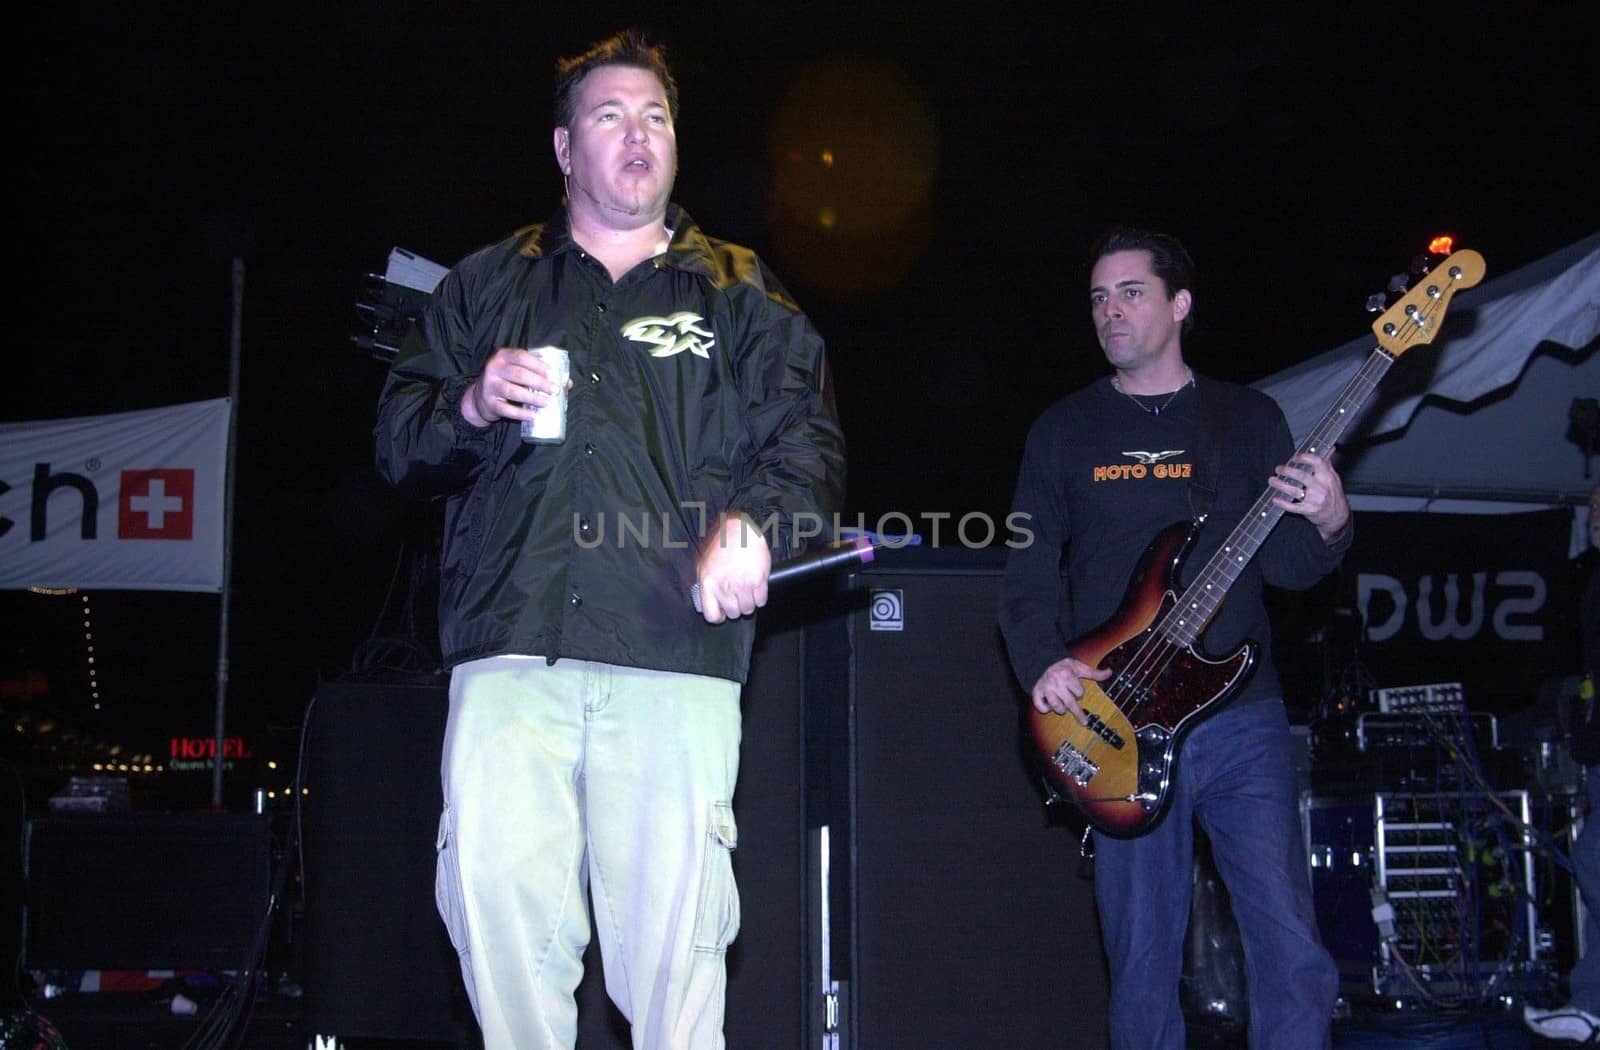 Smashmouth at the Swatch Wave Tour surf competition and rock concert at the Queen Mary in Long Beach, 02-02-00